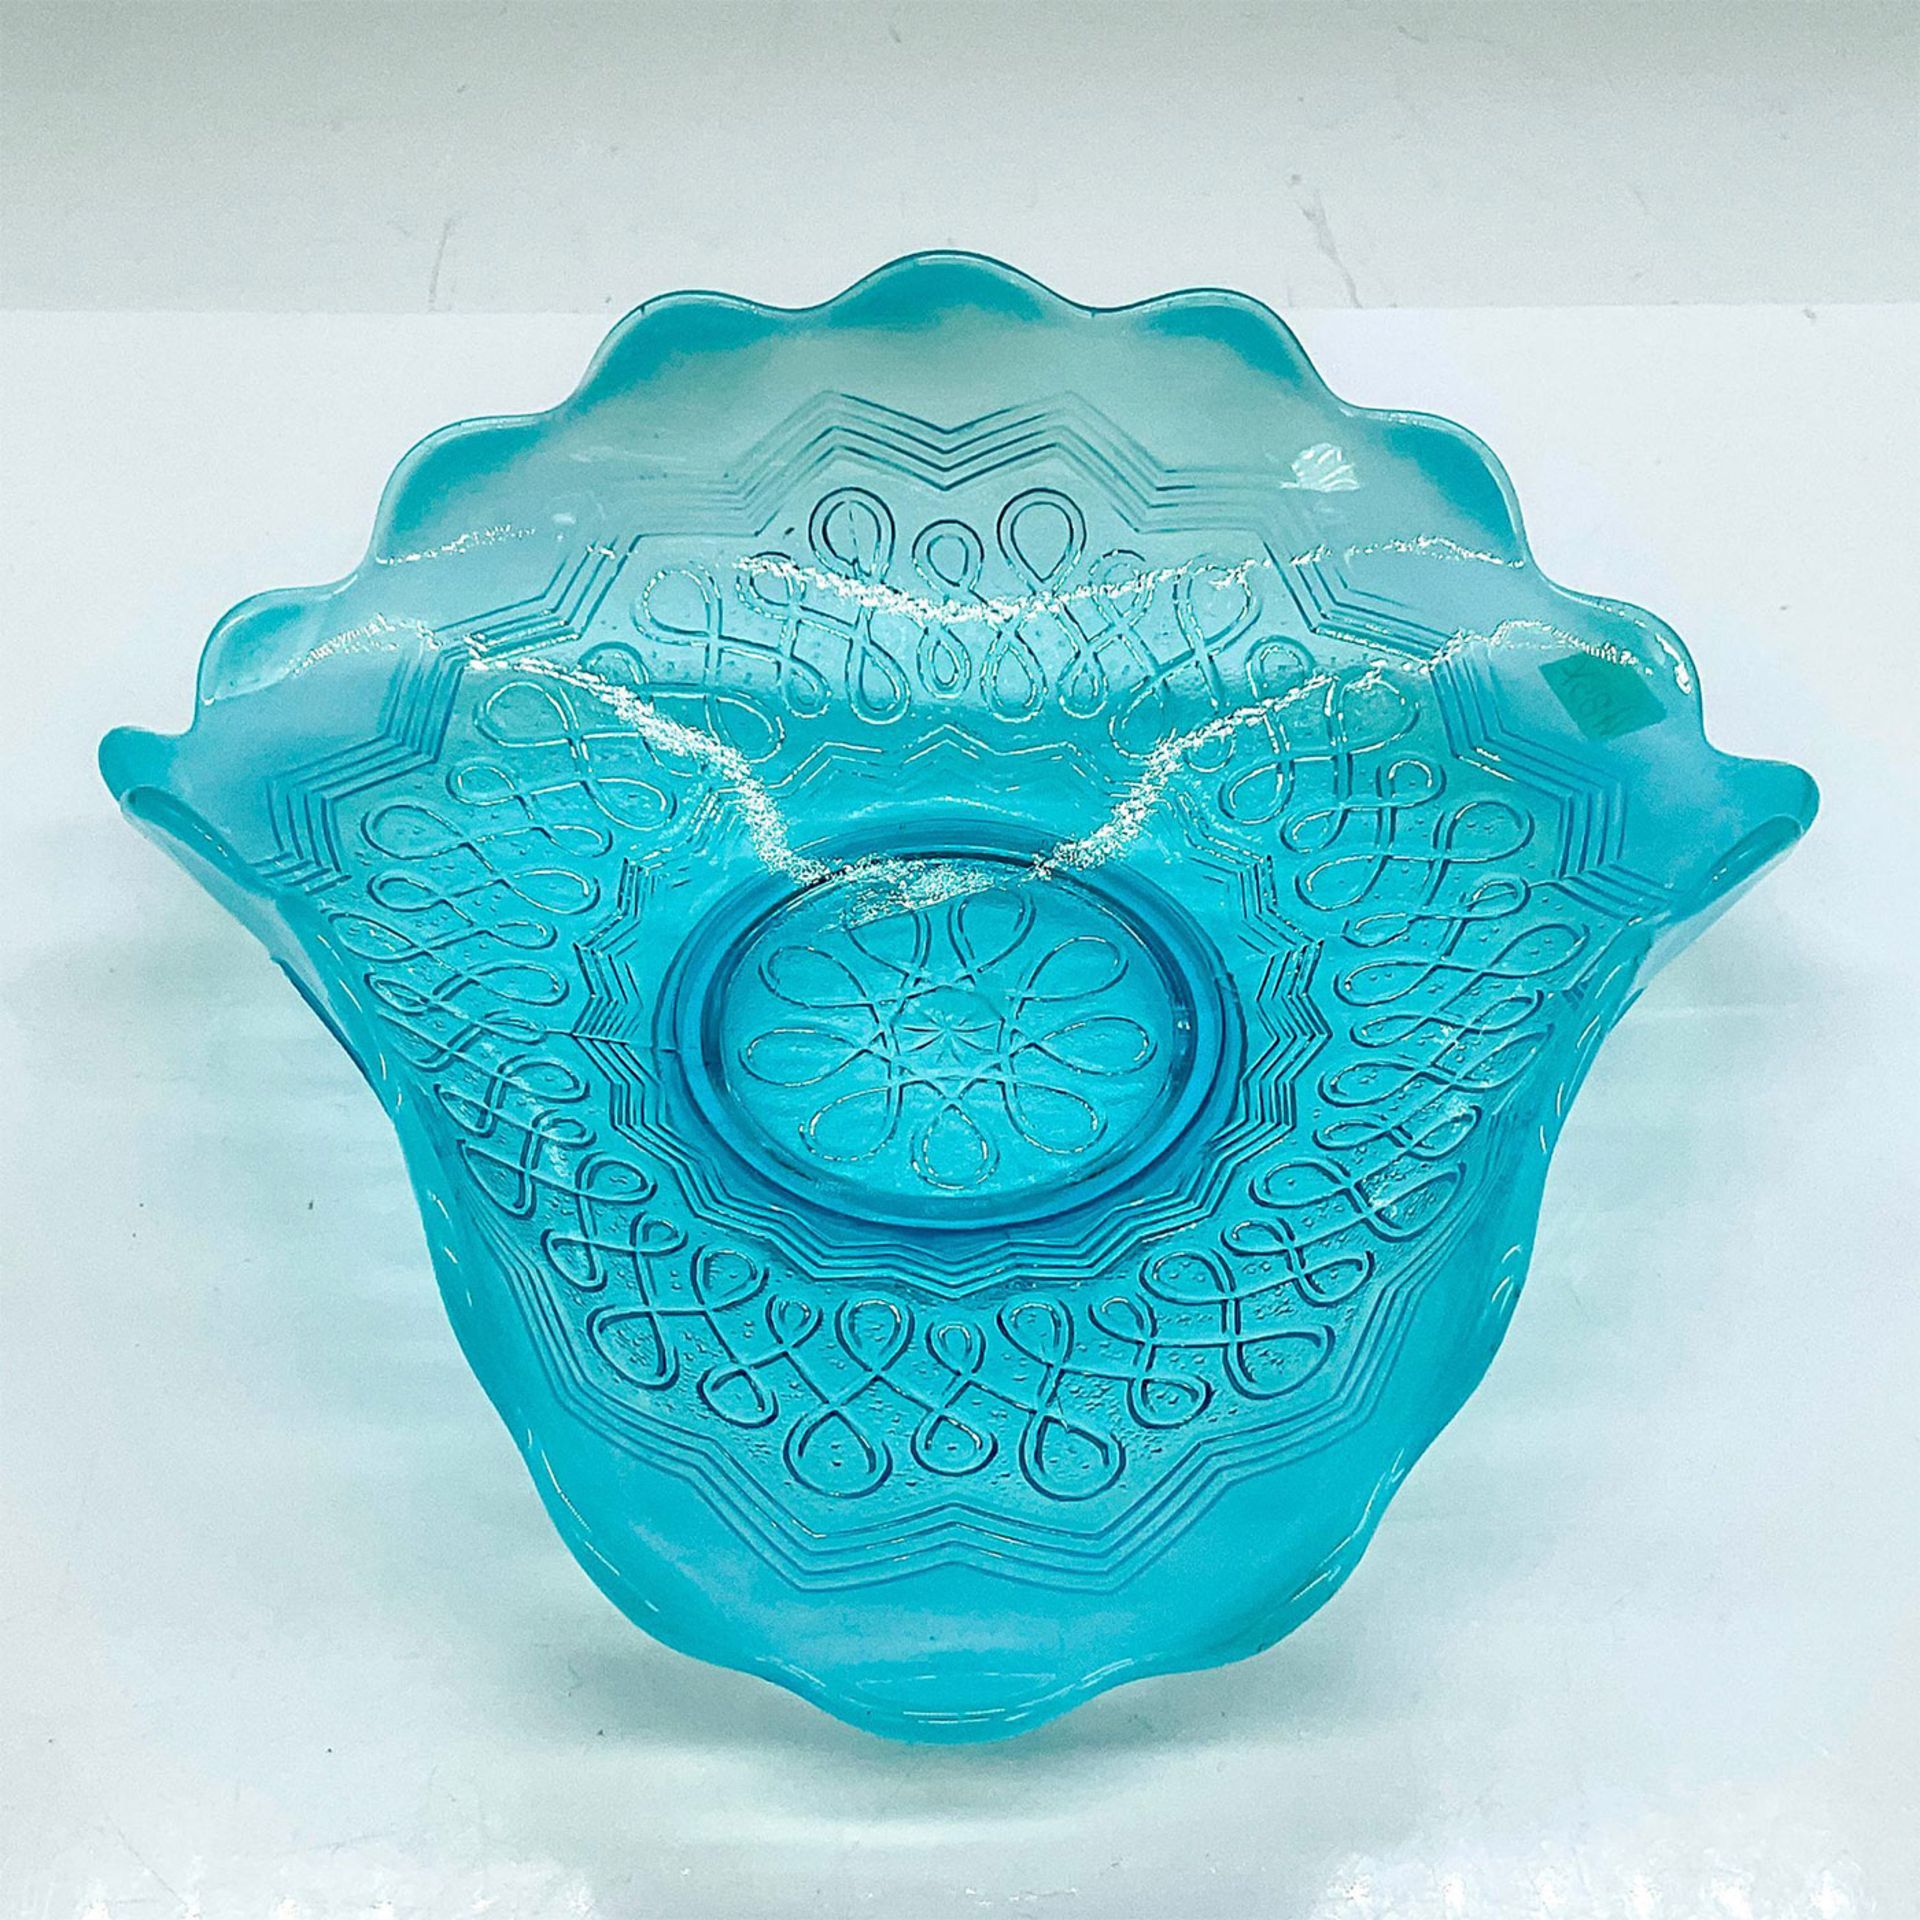 Antique Blue Jefferson Glass Bowl, Many Loops Pattern - Image 2 of 3